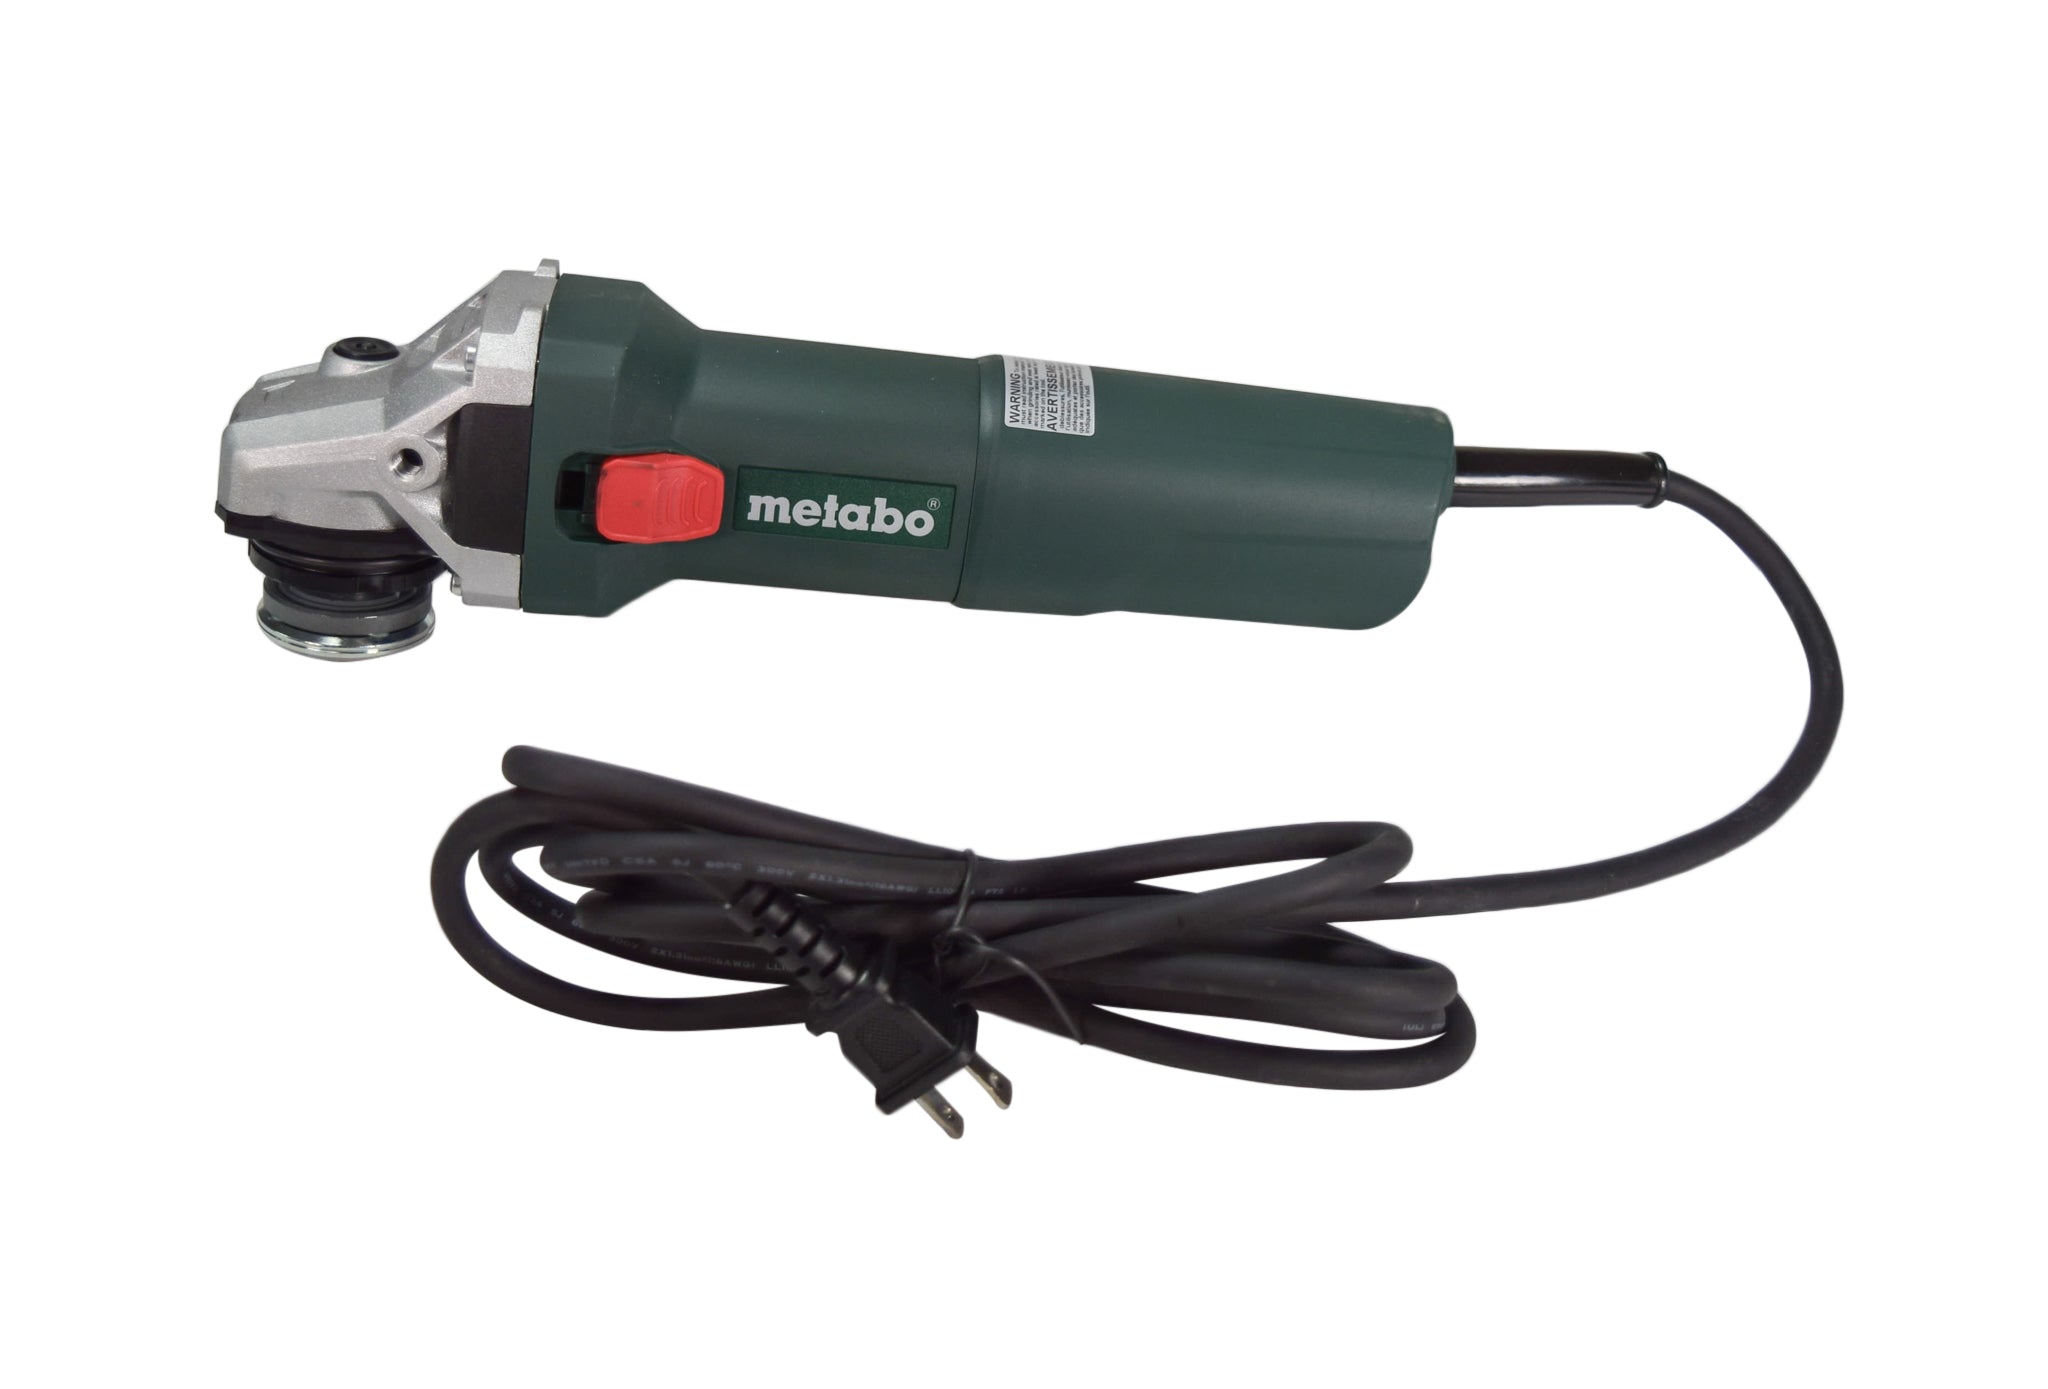 Metabo 603614420 W 1100-125 11 Amp 12,000 RPM 4.5" / 5" Corded Angle Grind